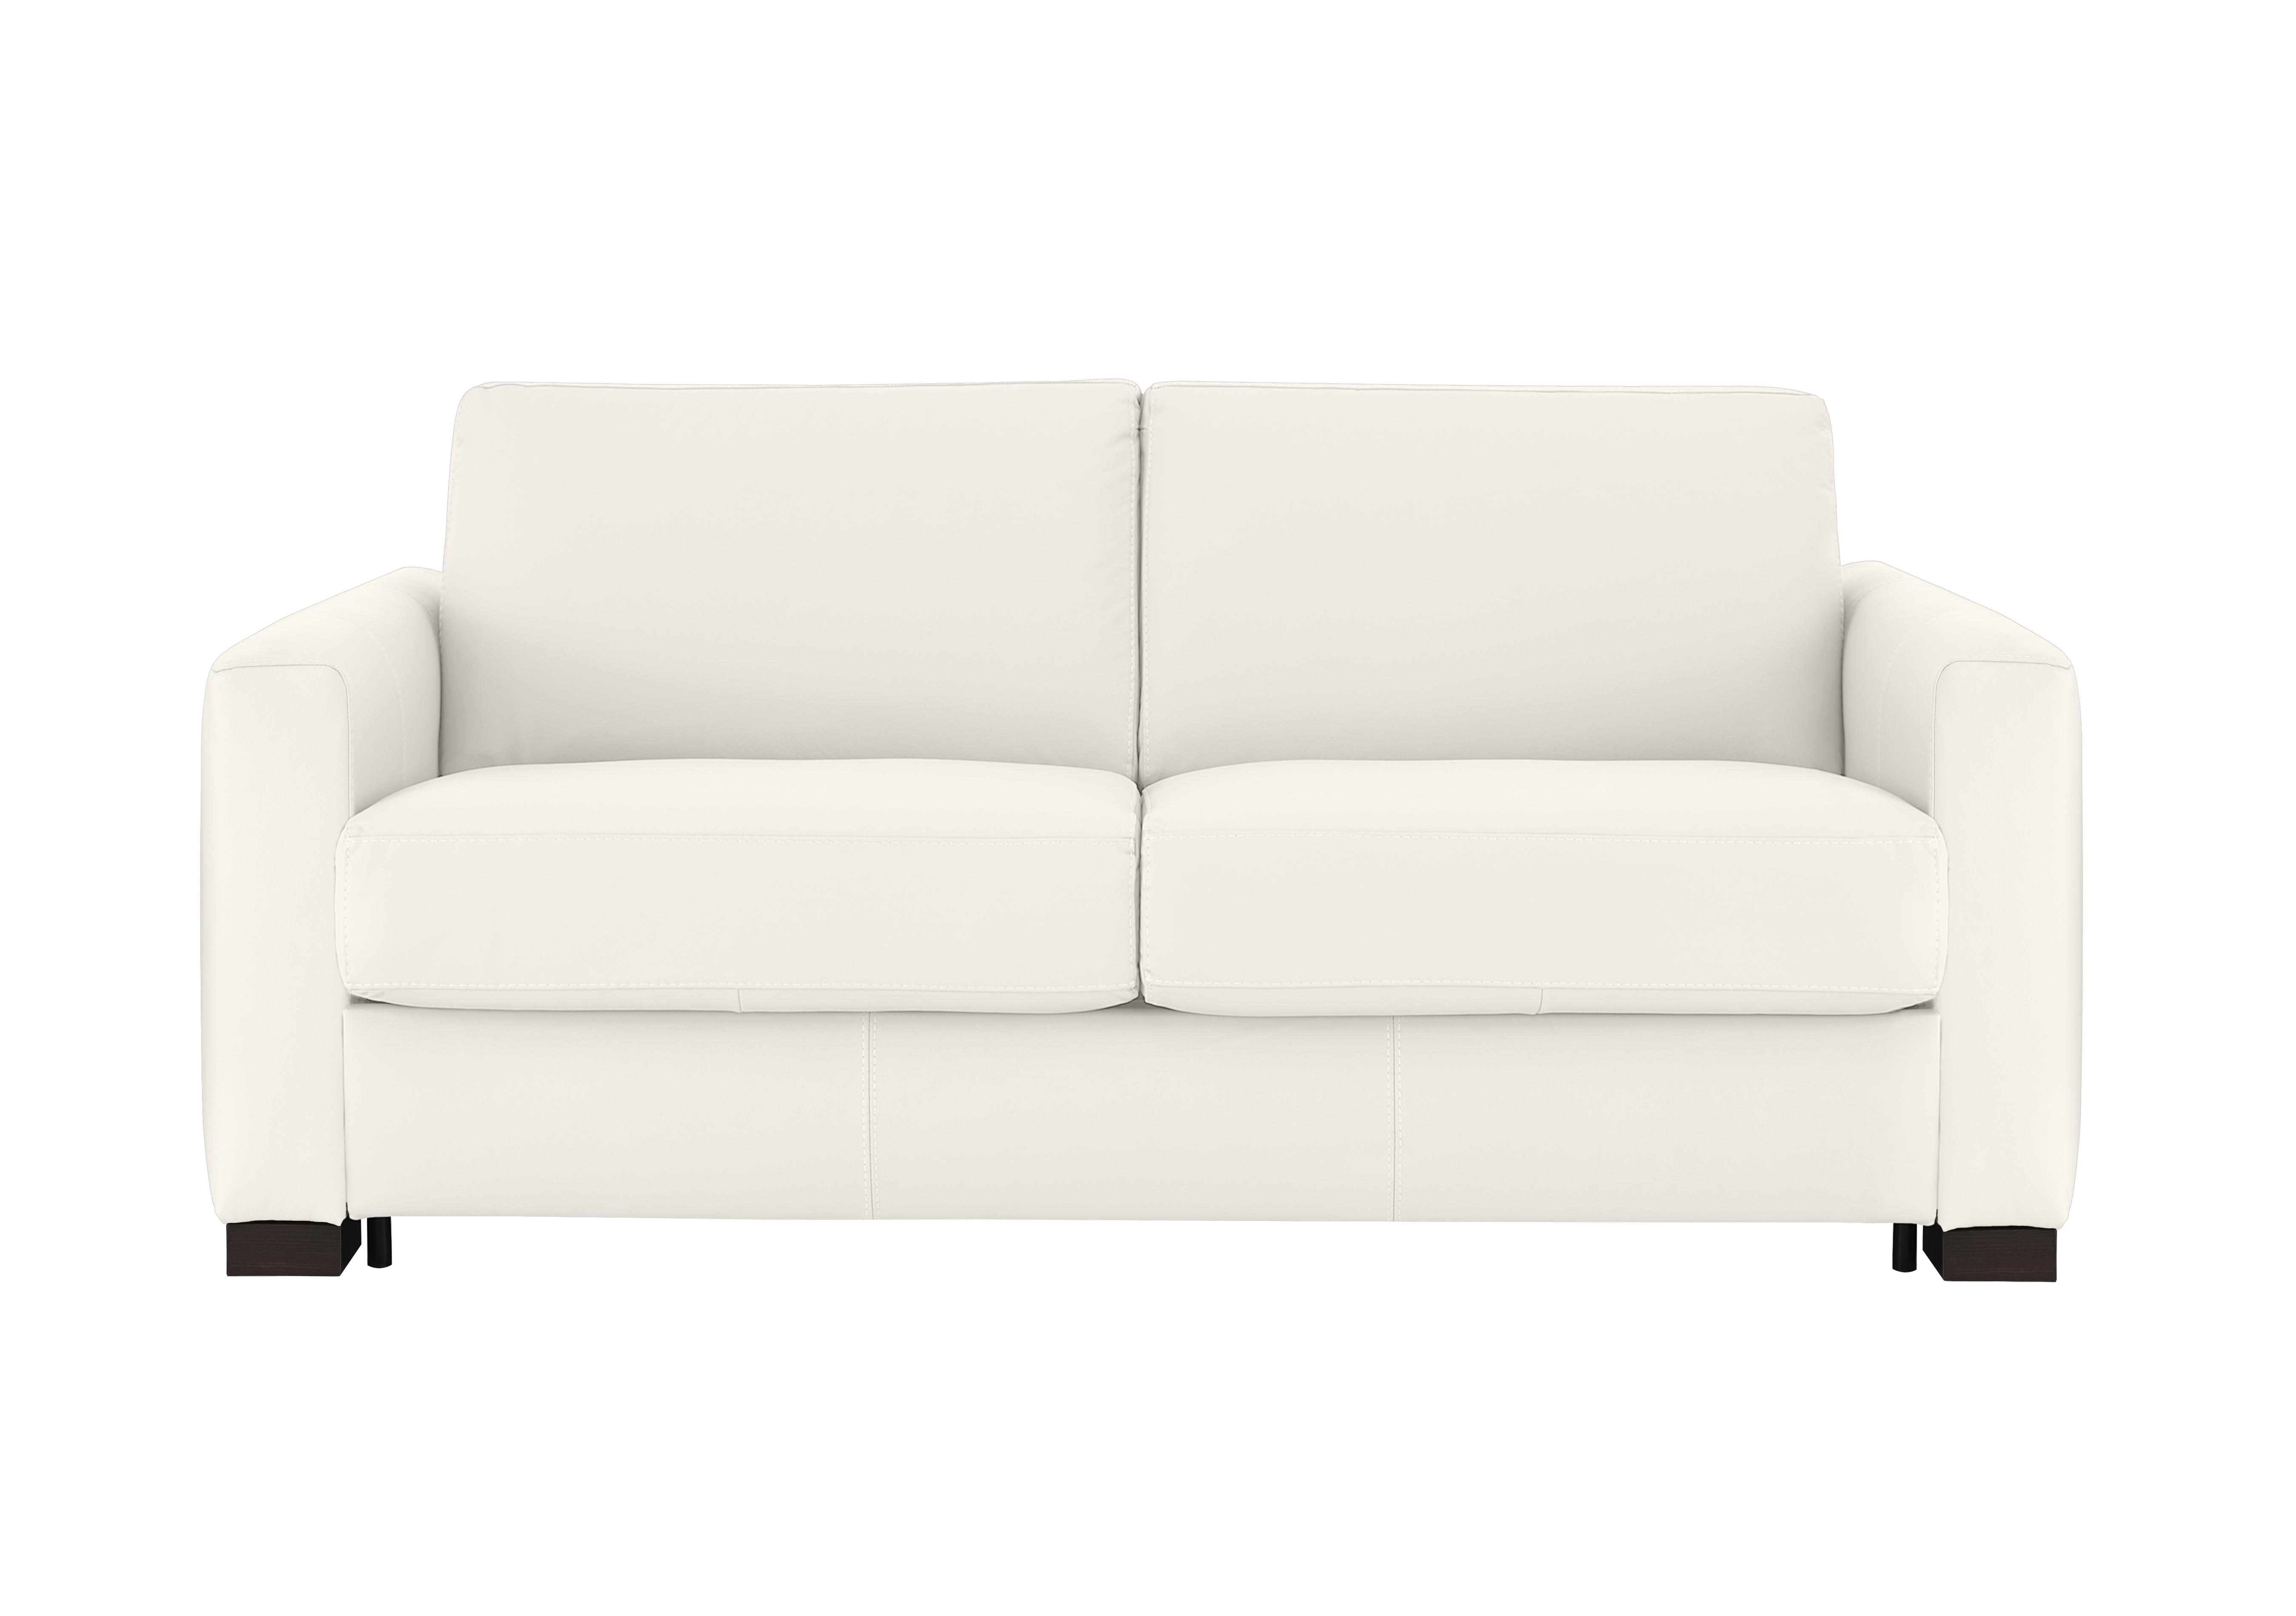 Alcova 2.5 Seater Leather Sofa Bed with Box Arms in Torello Bianco 93 on Furniture Village